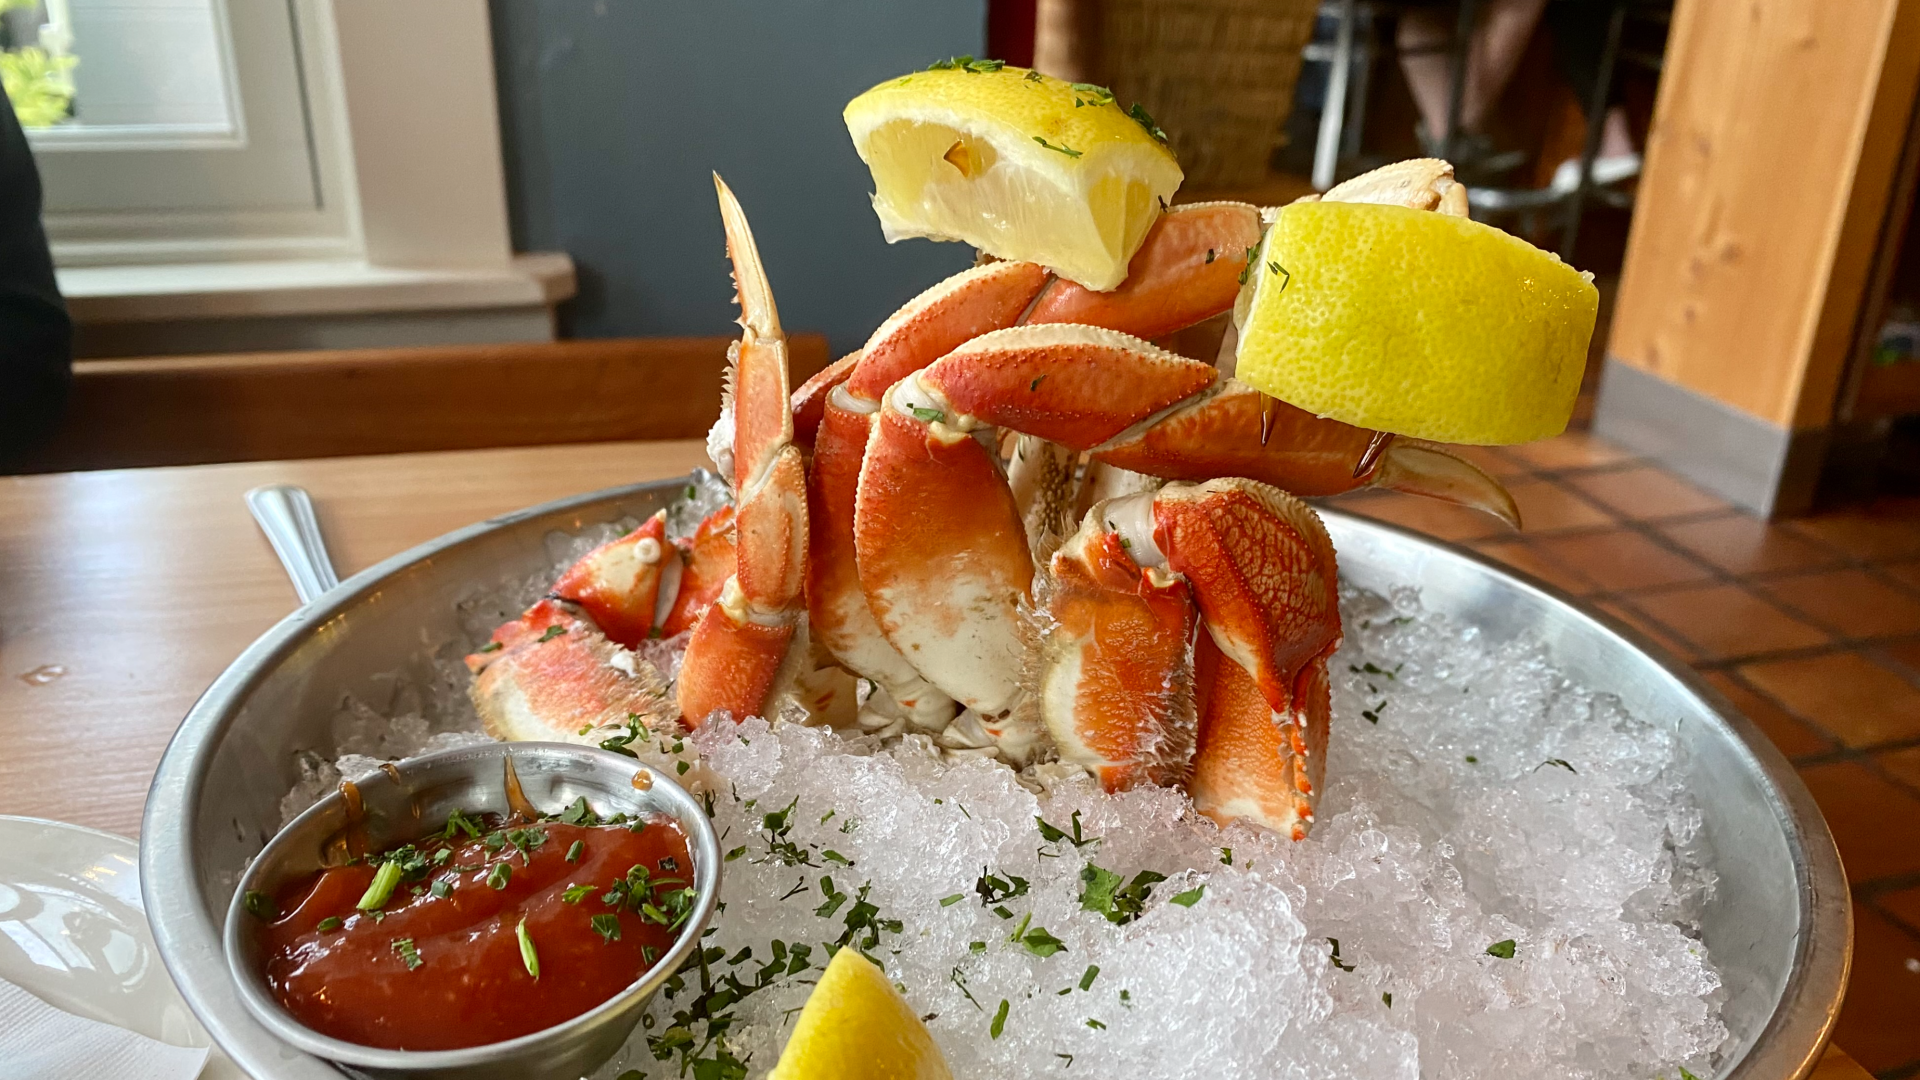 Crab legs sticking out of a bowl full of ice, garnished with lemon and a cocktail sauce dish on the side.